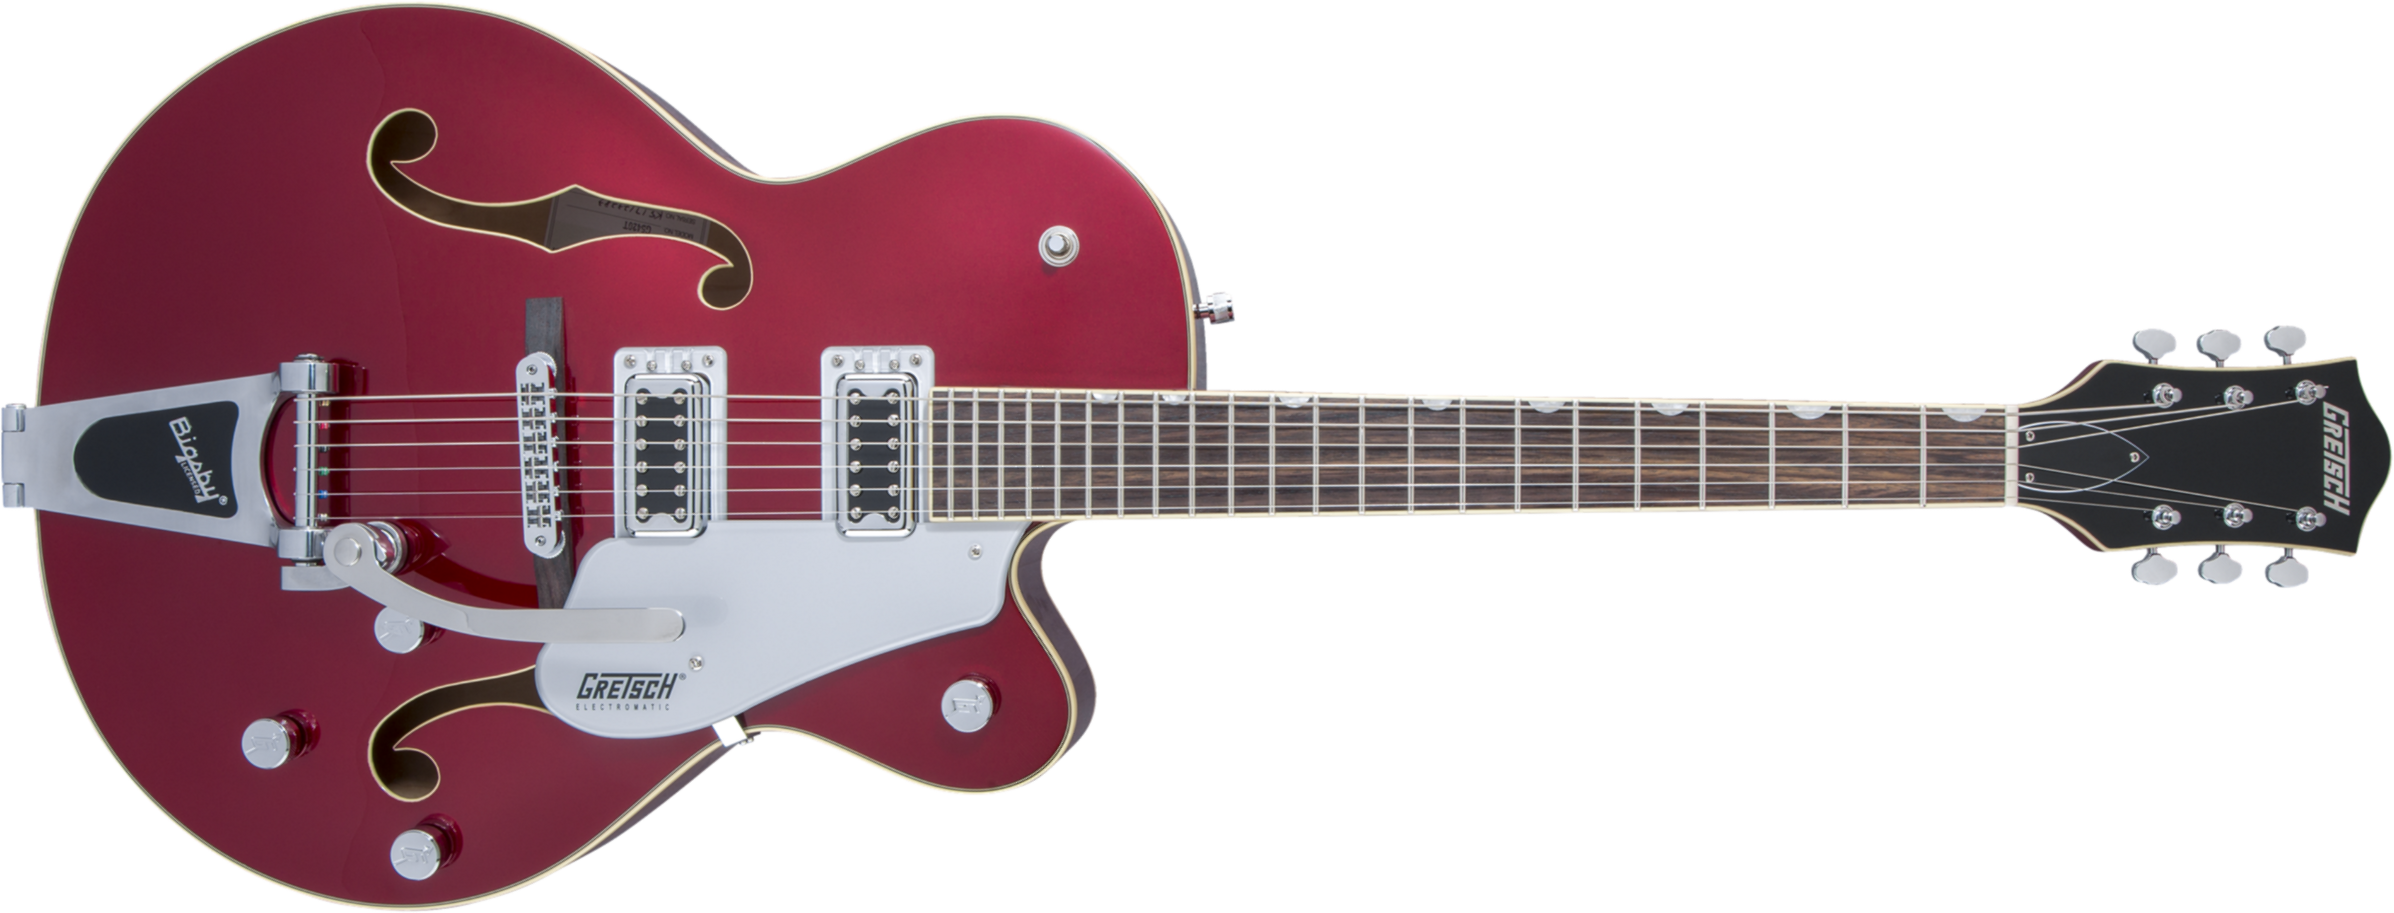 Gretsch G5420t Electromatic Hollow Body 2018 - Candy Apple Red - Guitare Électrique 1/2 Caisse - Main picture